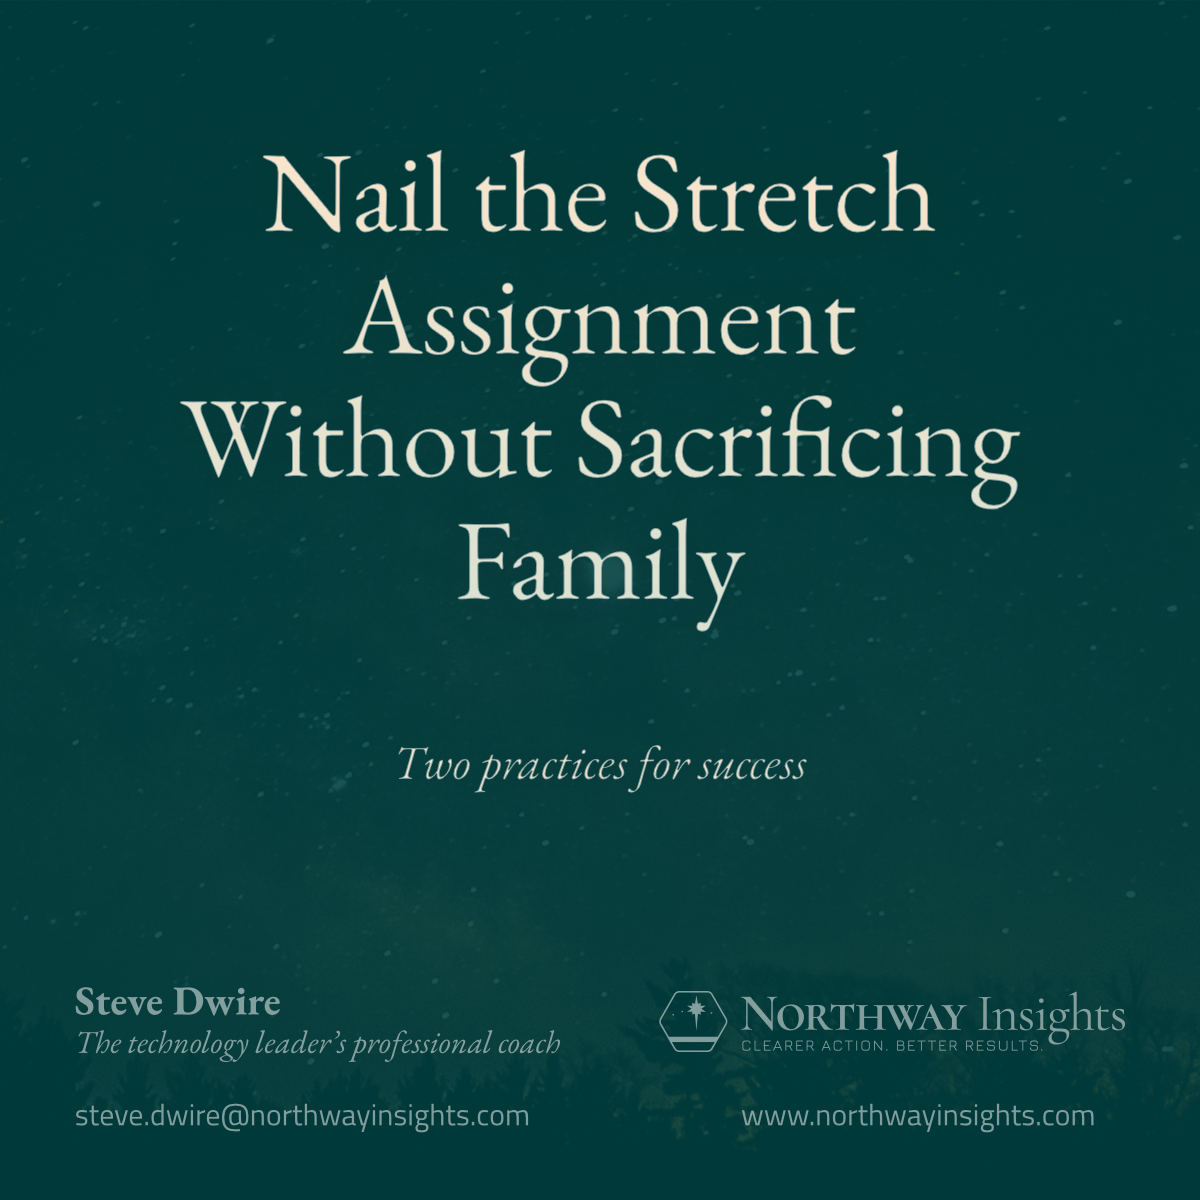 Nail the Stretch Assignment Without Sacrificing Family (Two practices for success)